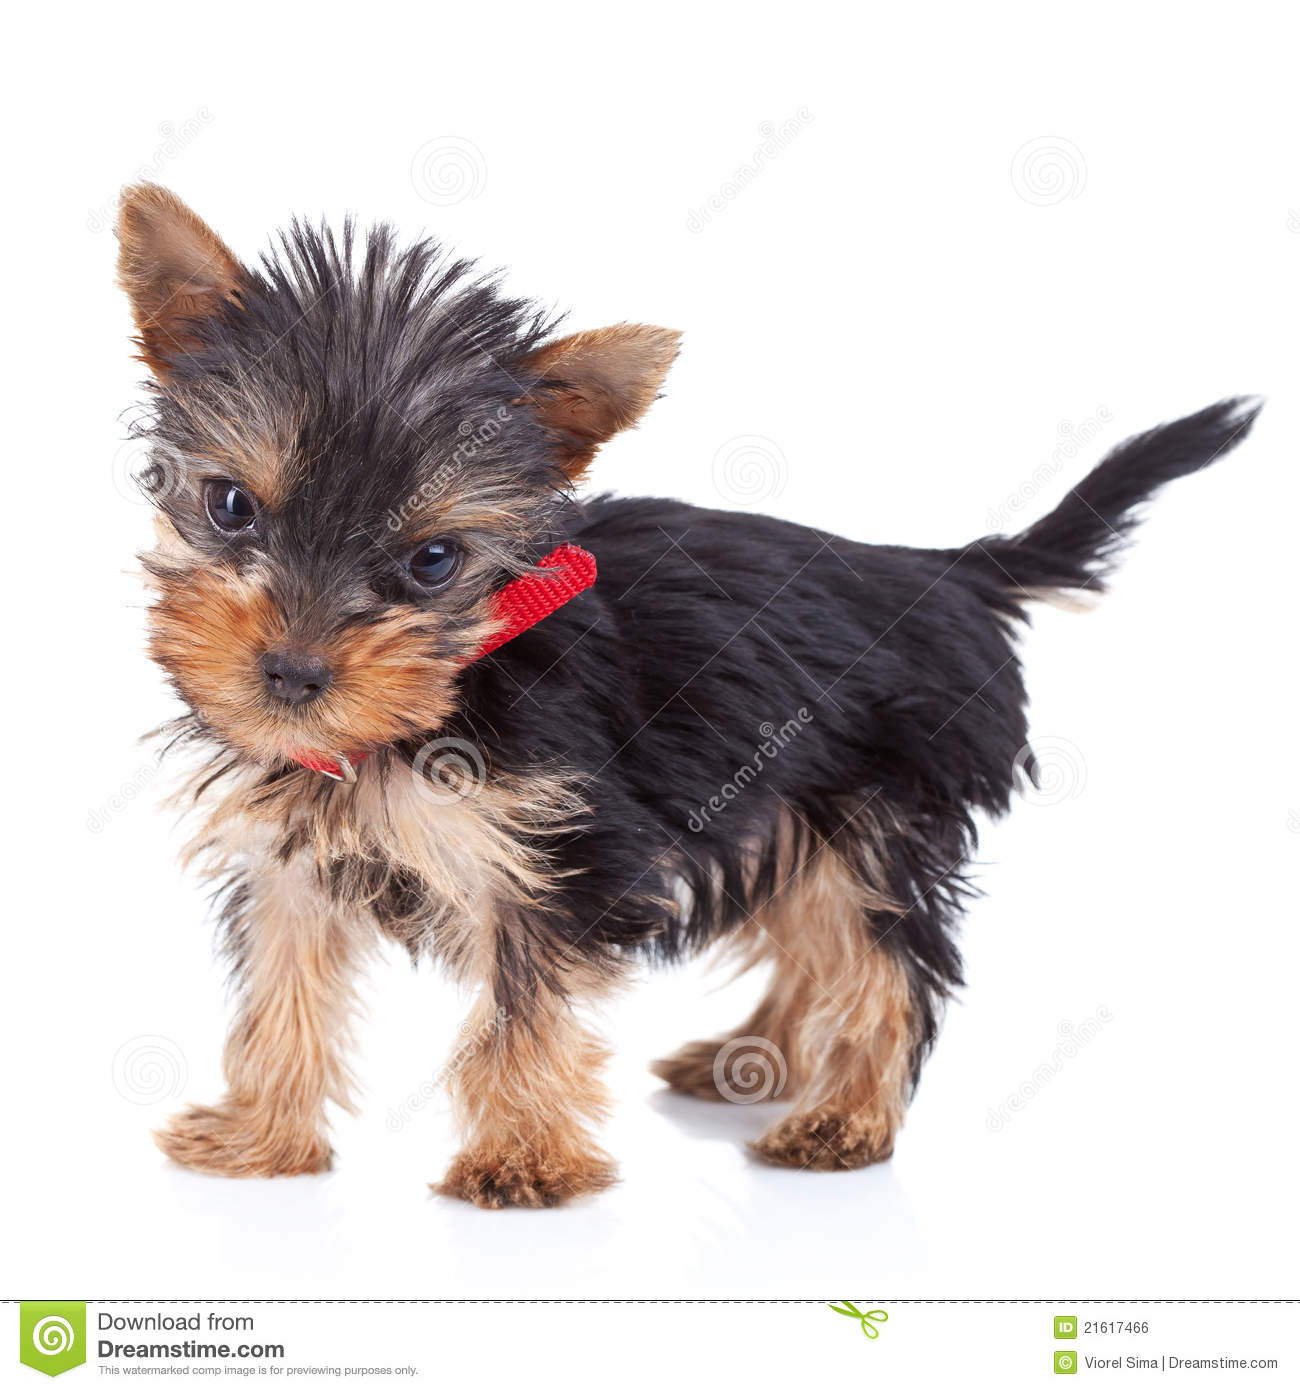 Cute Yorkie Toy Standing On White Background And Looking To The Camera    